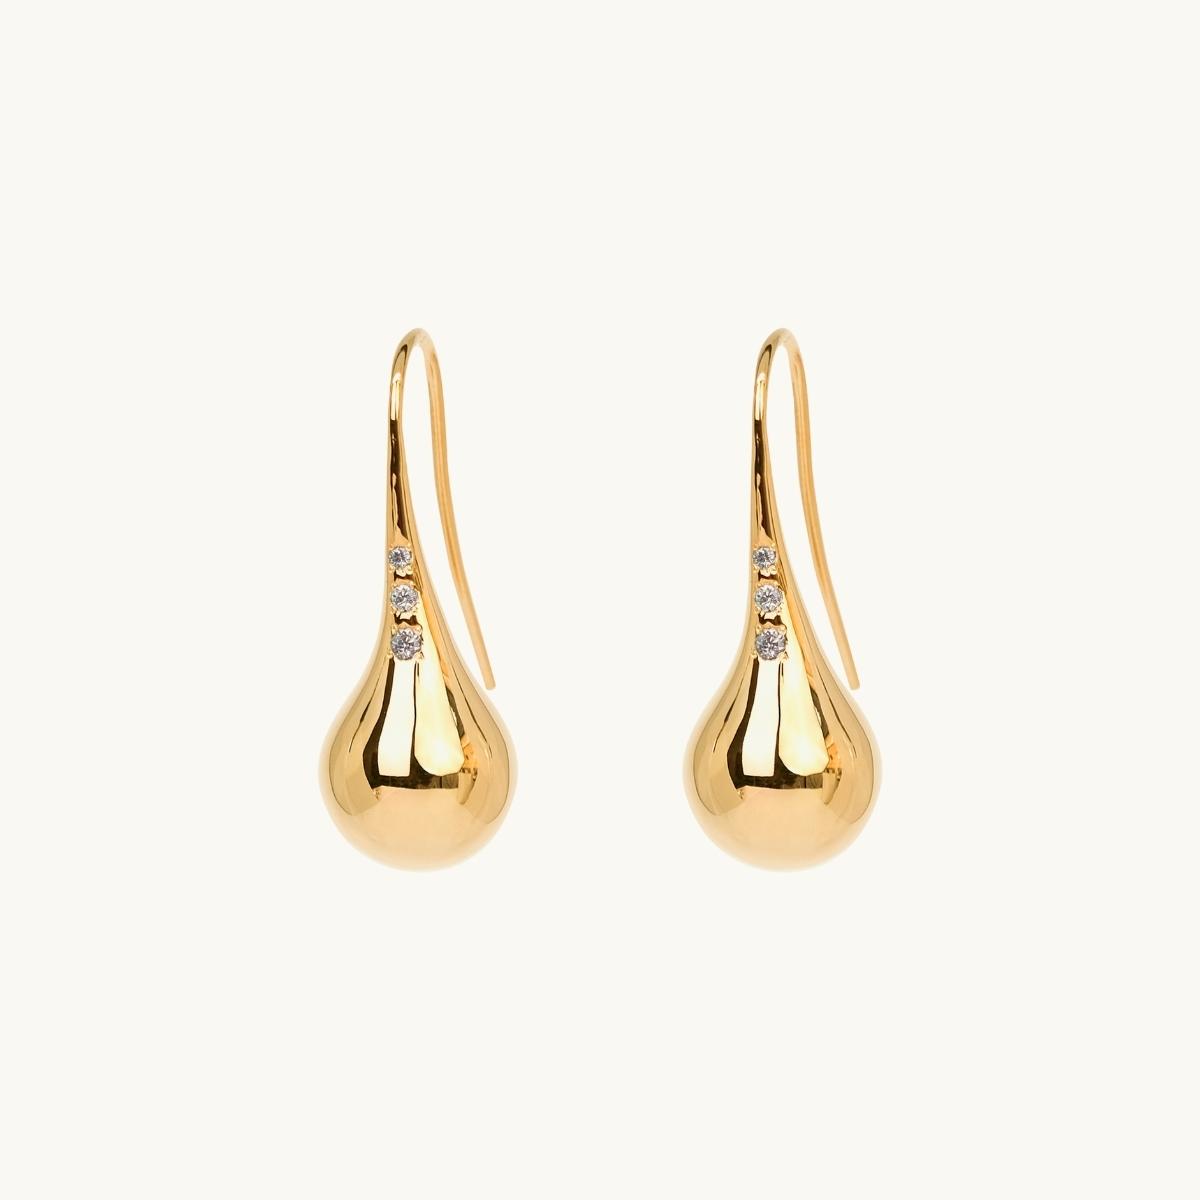 Drop shaped earrings in gold with white stones